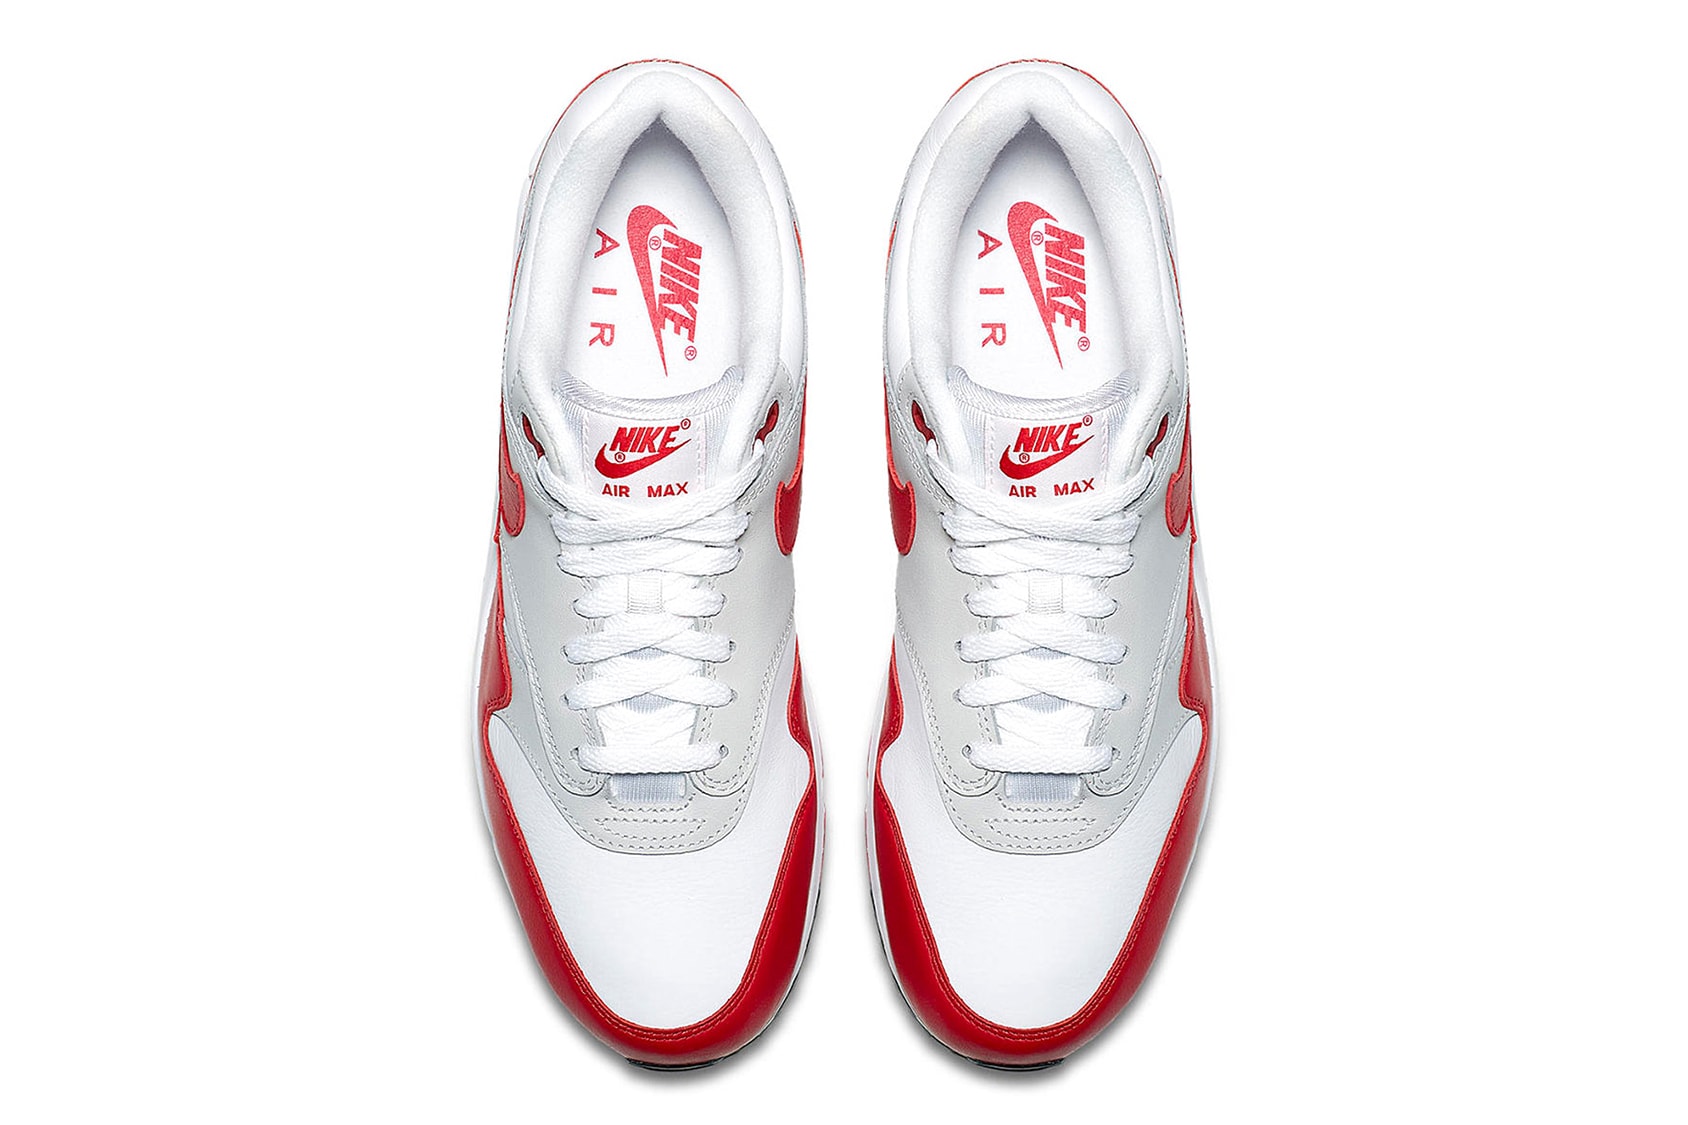 Nike Air Max 1 x 90 Hybrid White Red Colorway Closer Look Release Date Details Cop Purchase Buy Now Raffle Kicks Shoes Trainers Sneakers